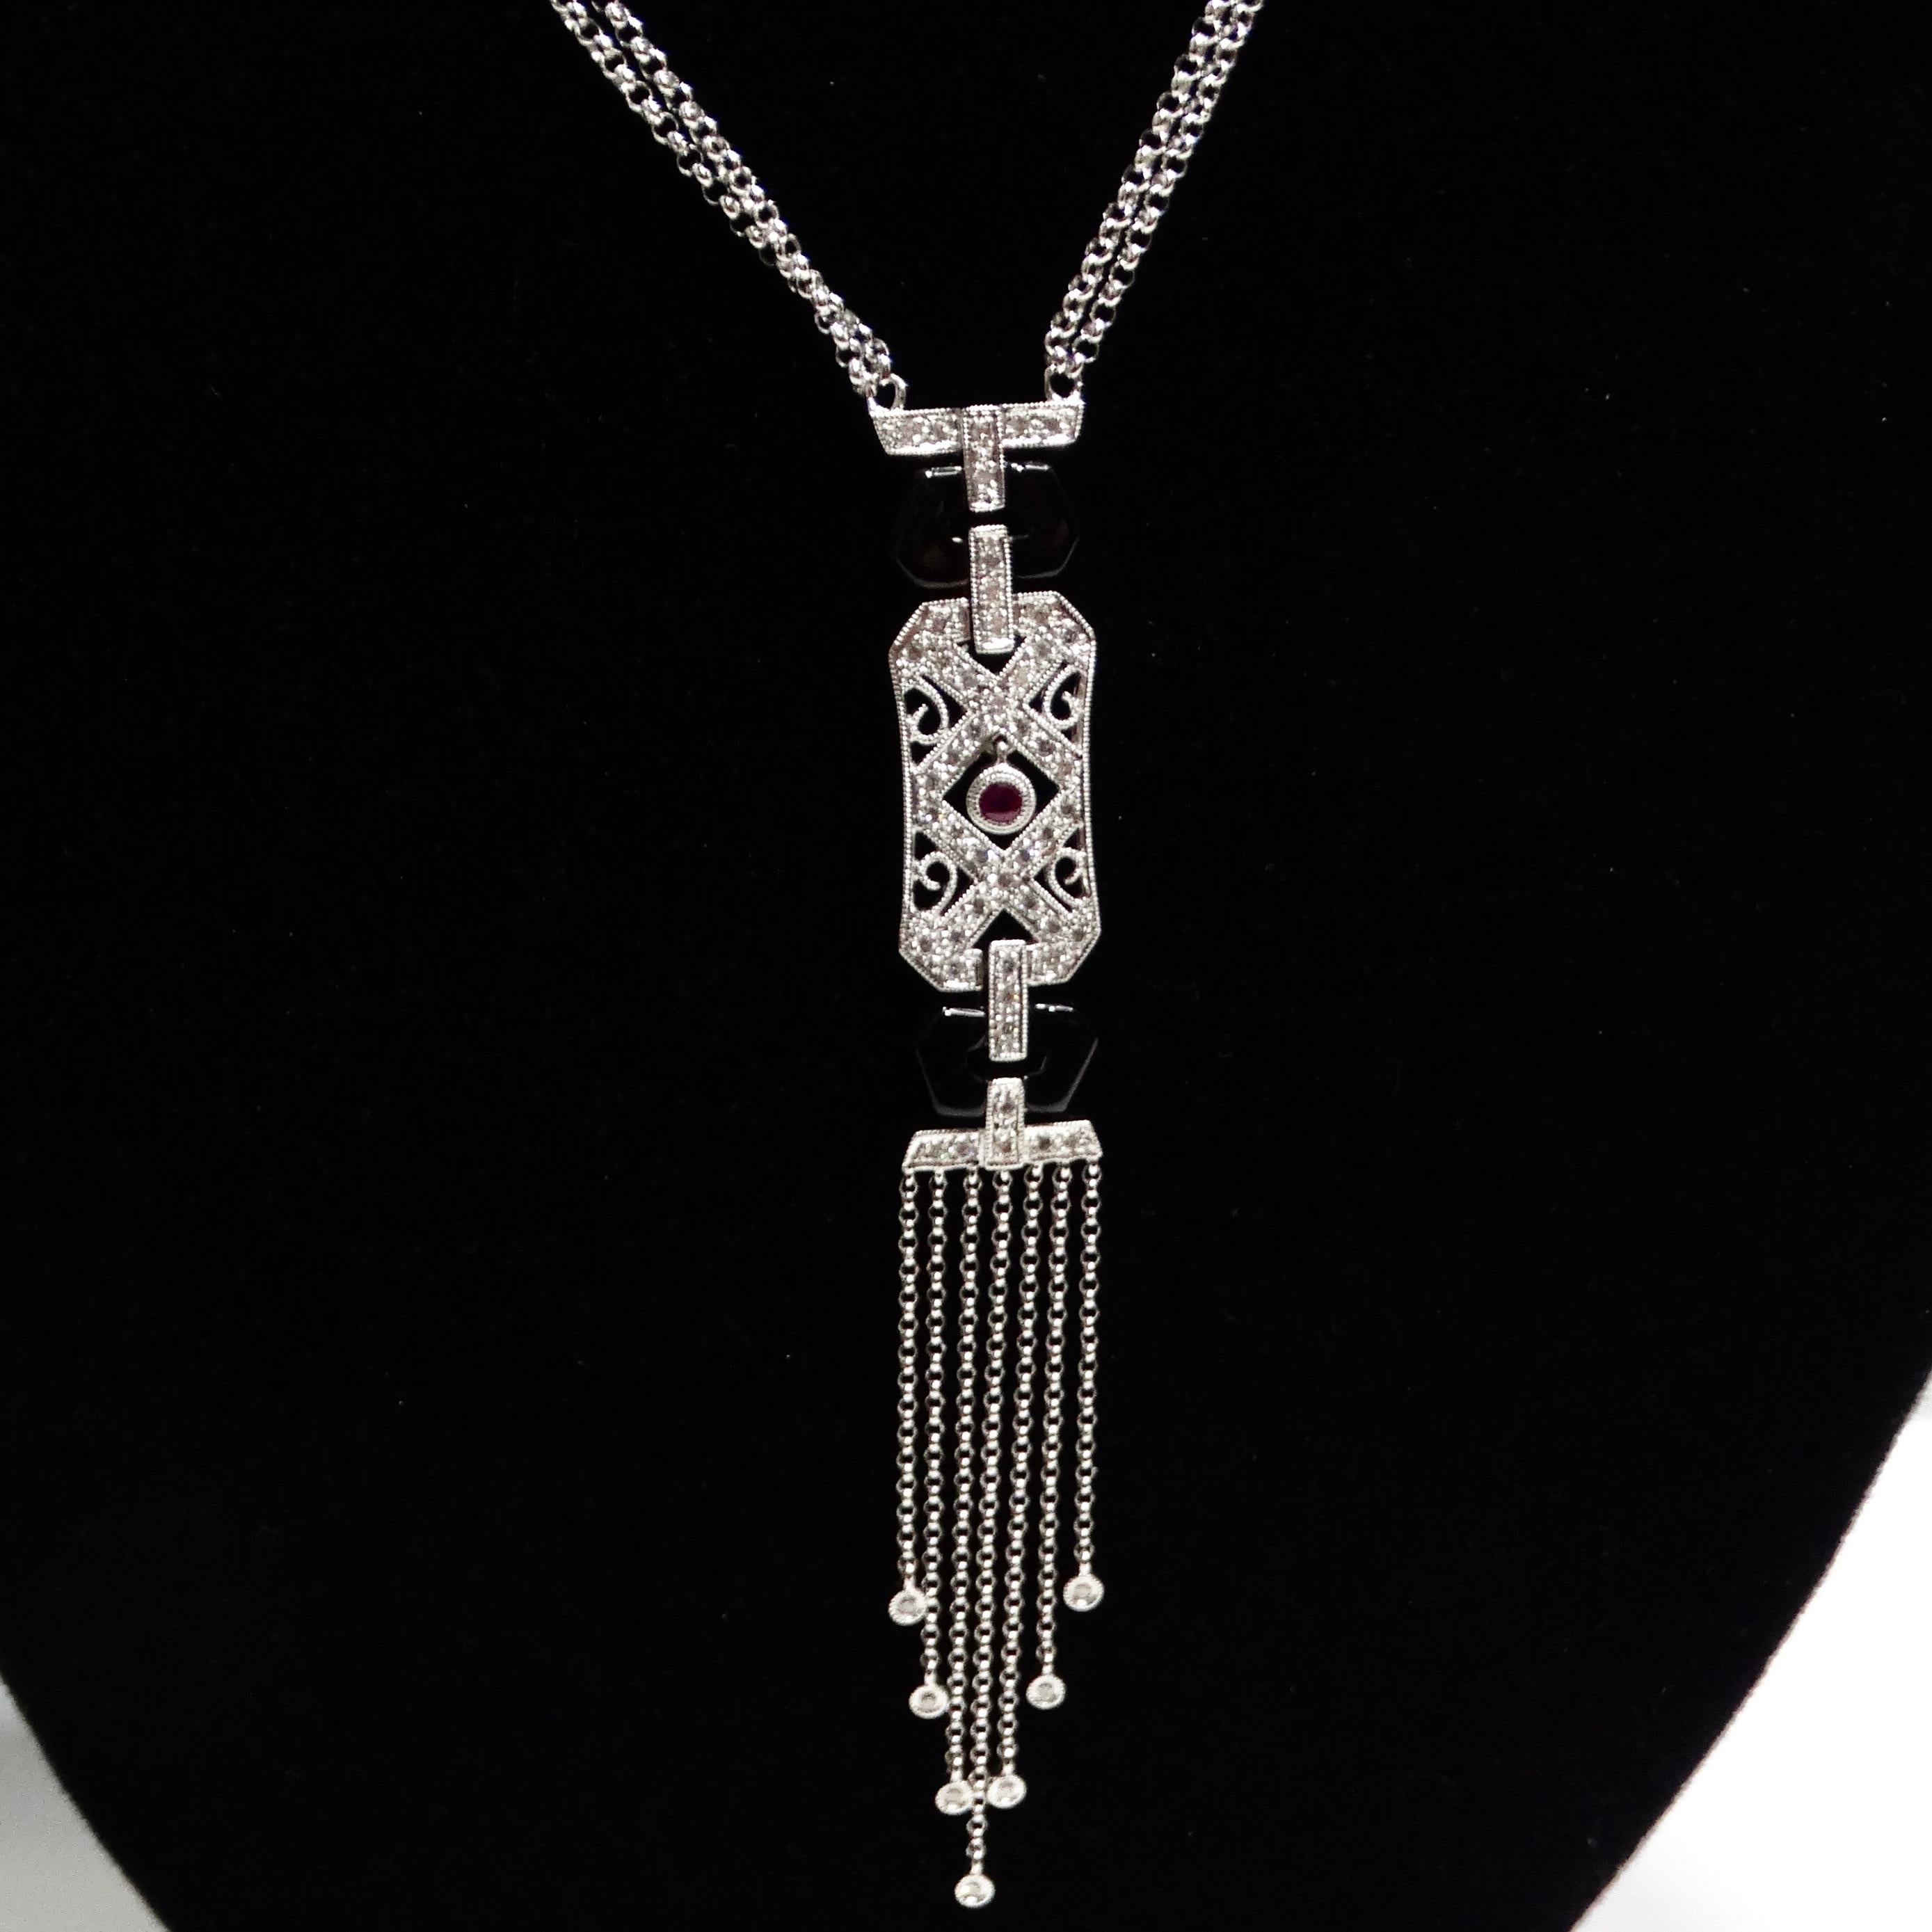 Adorn yourself in luxury with this exquisite 14K White Gold Diamond, Ruby, and Onyx Necklace, a true testament to elegance and sophistication.

Crafted with meticulous attention to detail, this custom-made necklace boasts a stunning pendant that